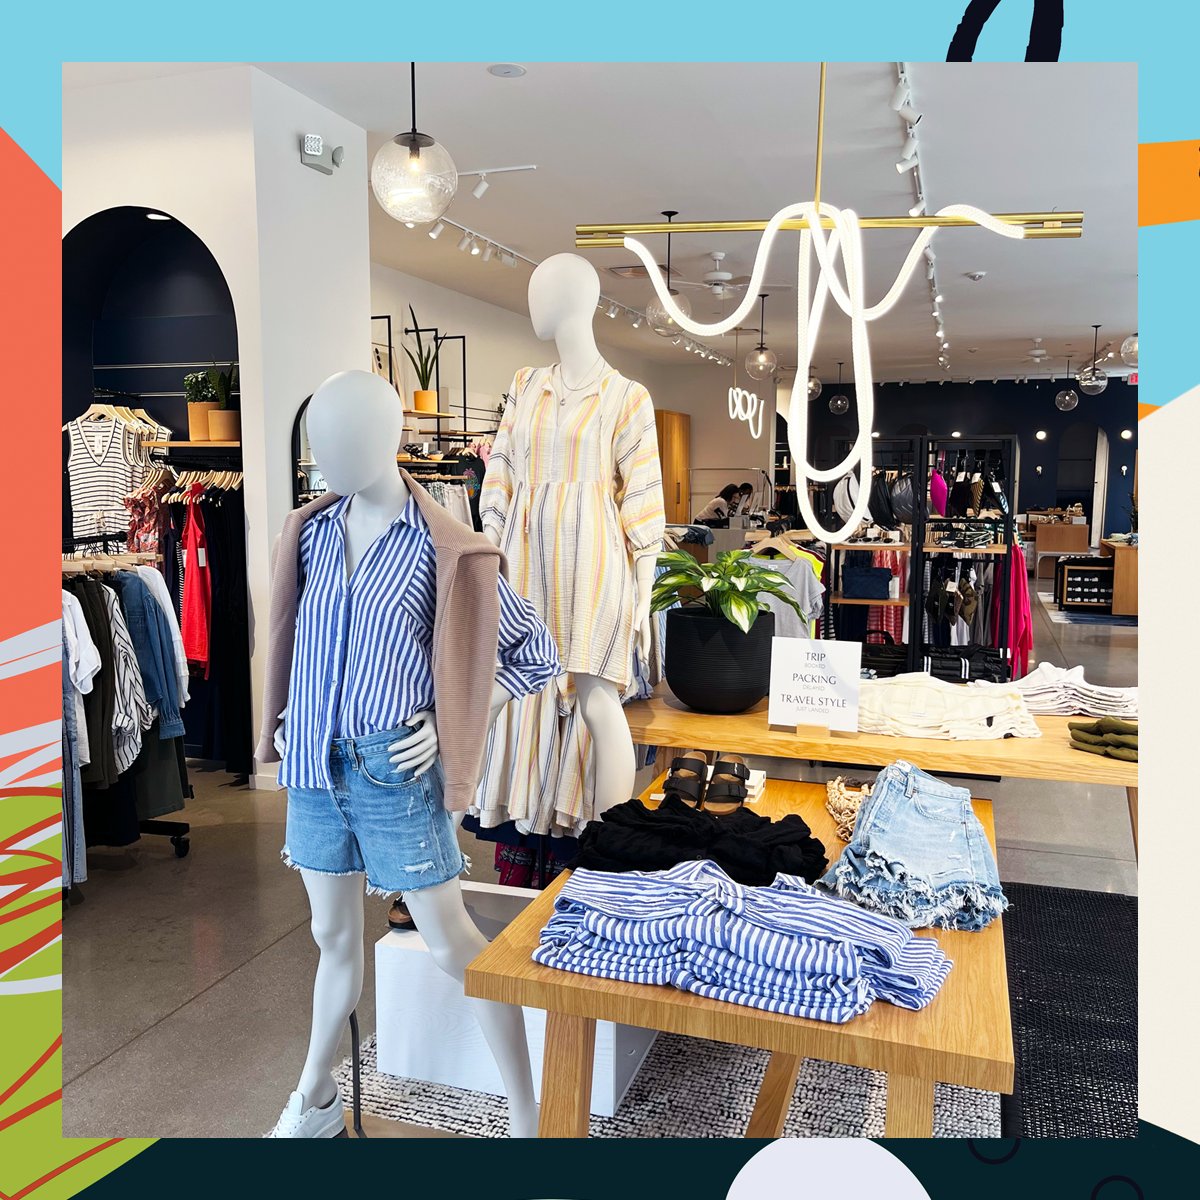 Tell us about your favorite new Spring fashion trend. Evereve has colorful, playful styles for the season. Come in to up your fashion game. #thebayshorelife #springtrends #springfashion